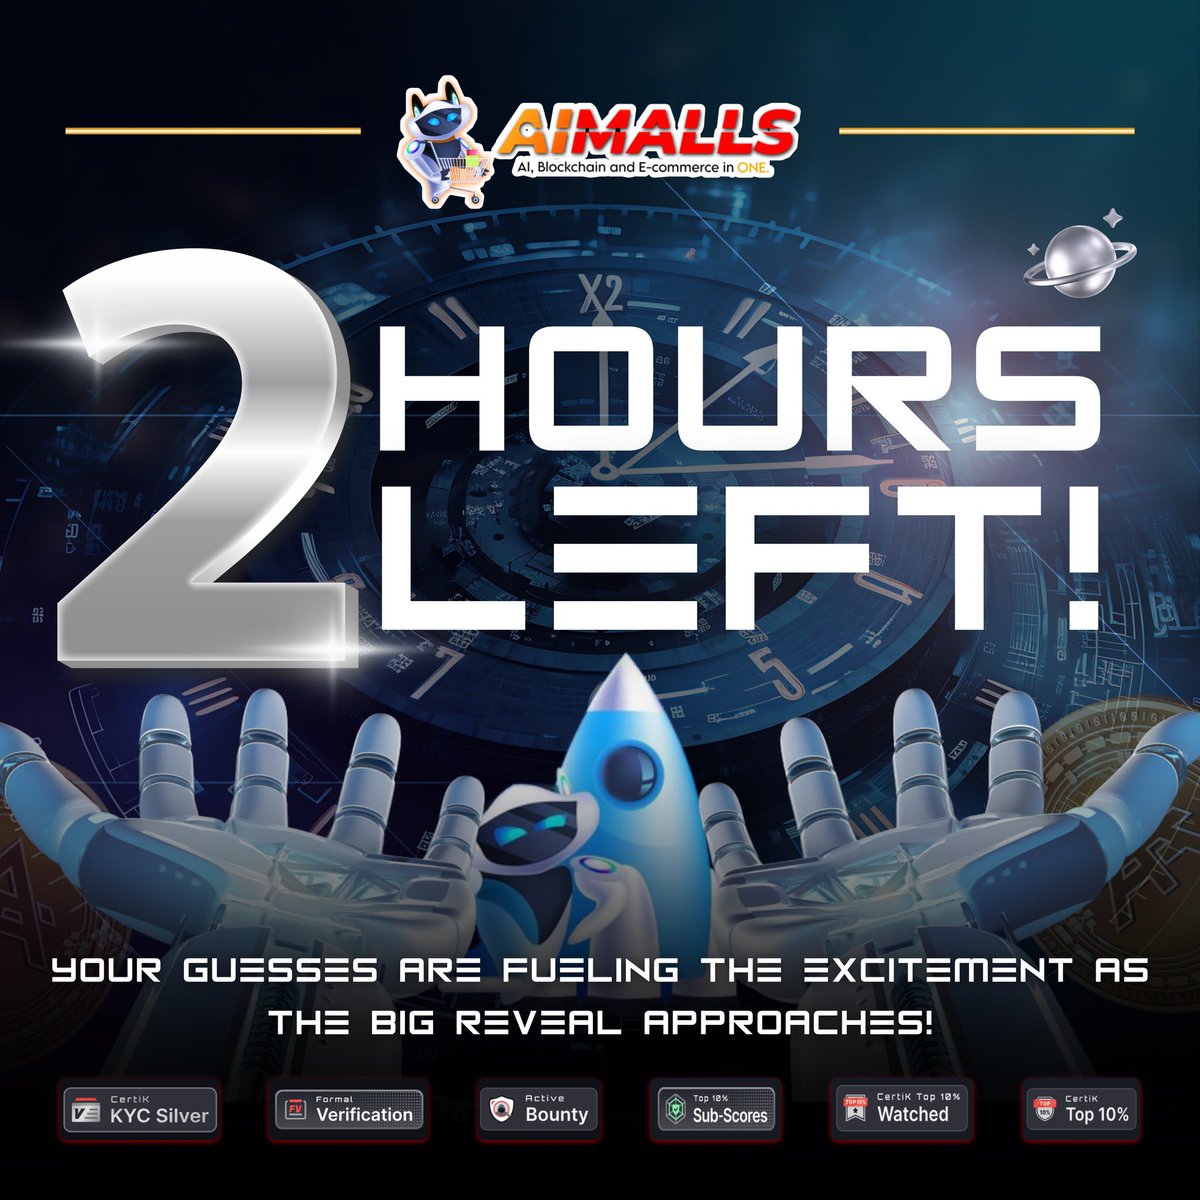 🕰️ Only 2 HOURS LEFT! The anticipation is heating up for the big Announcement!🔥Stay on the edge of your seat! Your guesses are fueling the excitement as the big reveal approaches!🧠 #AiMalls #AIT #Countdown #2hoursleft #Innovation #Defi #Ecommerce $AIT🚀